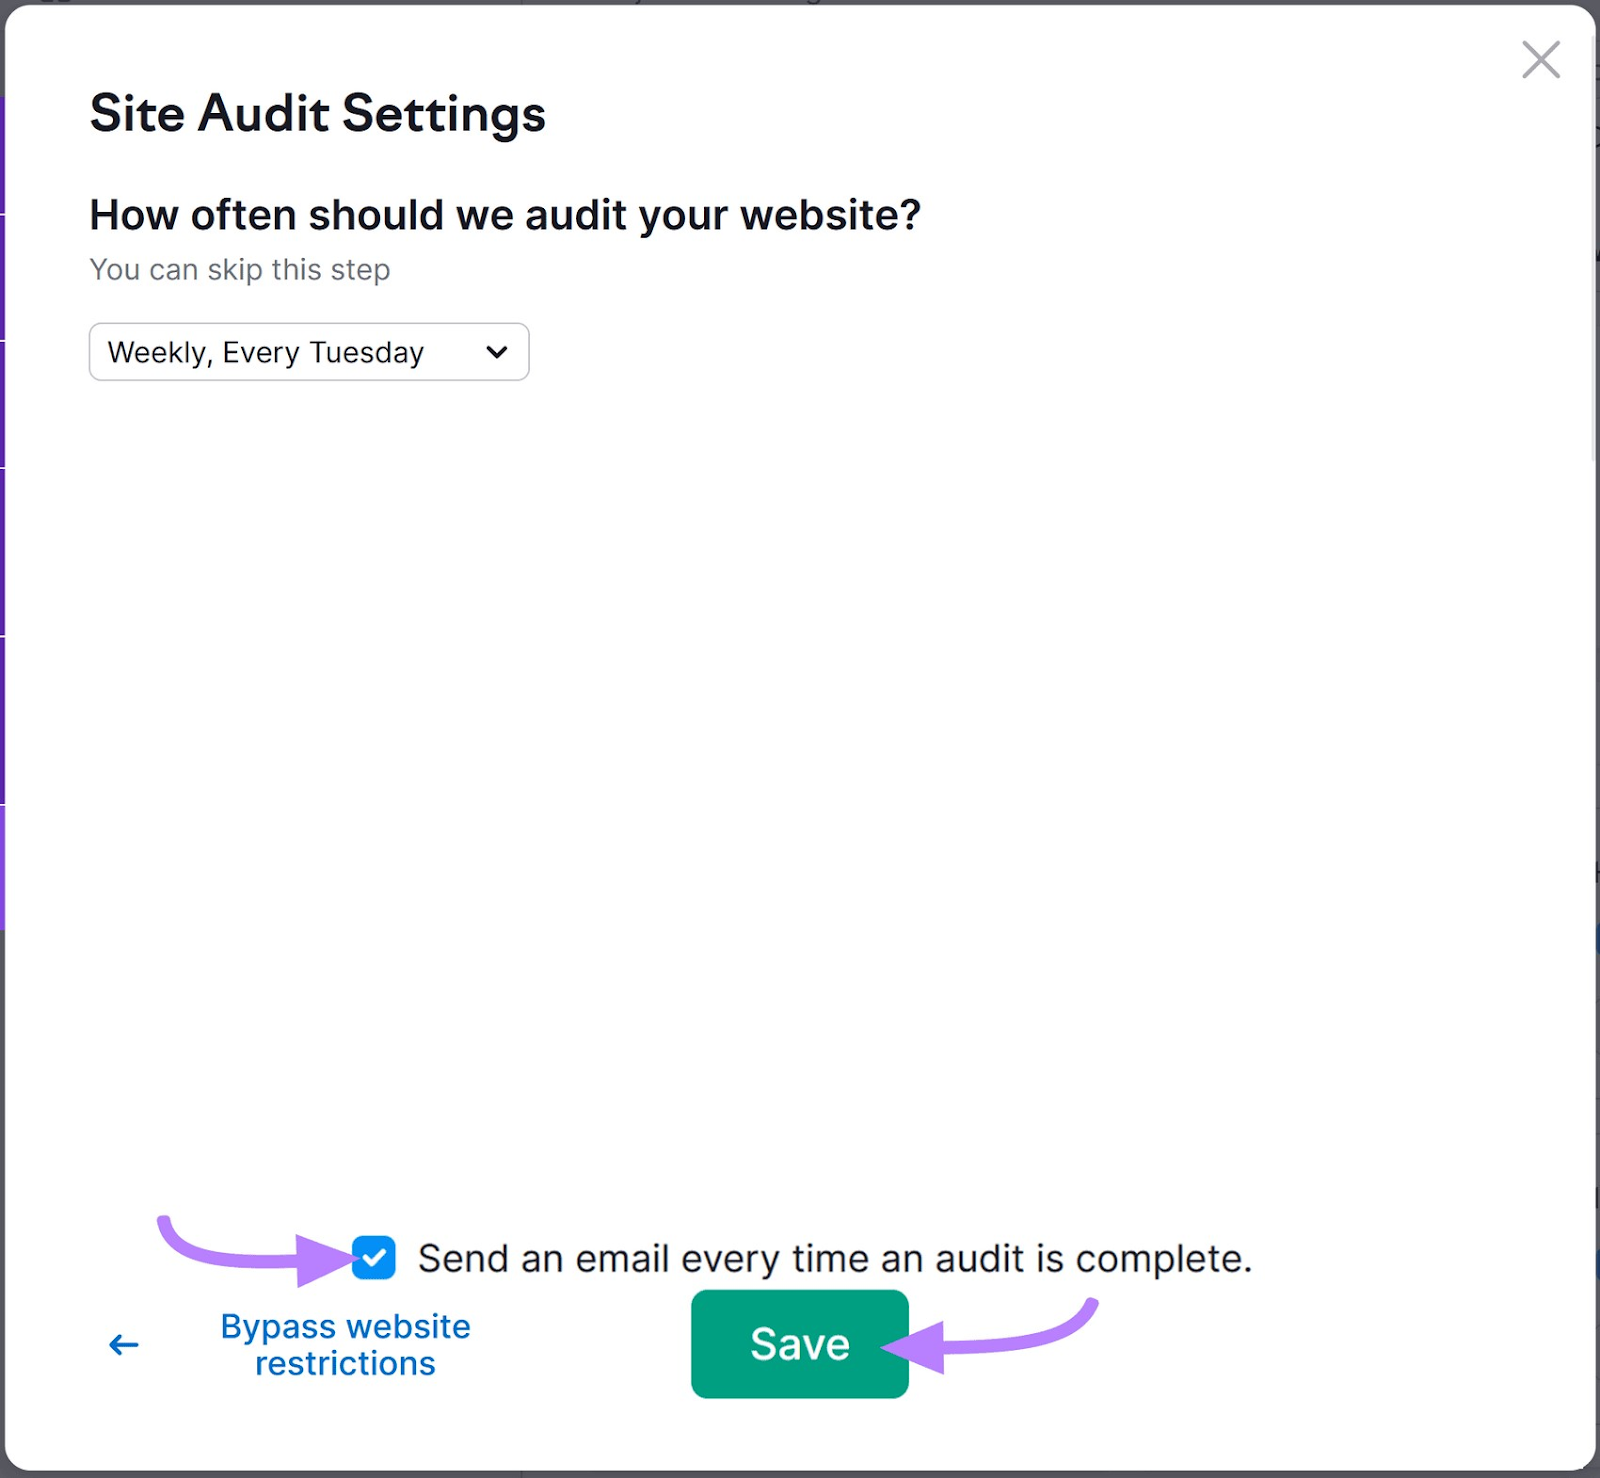 "Save" Site Audit settings